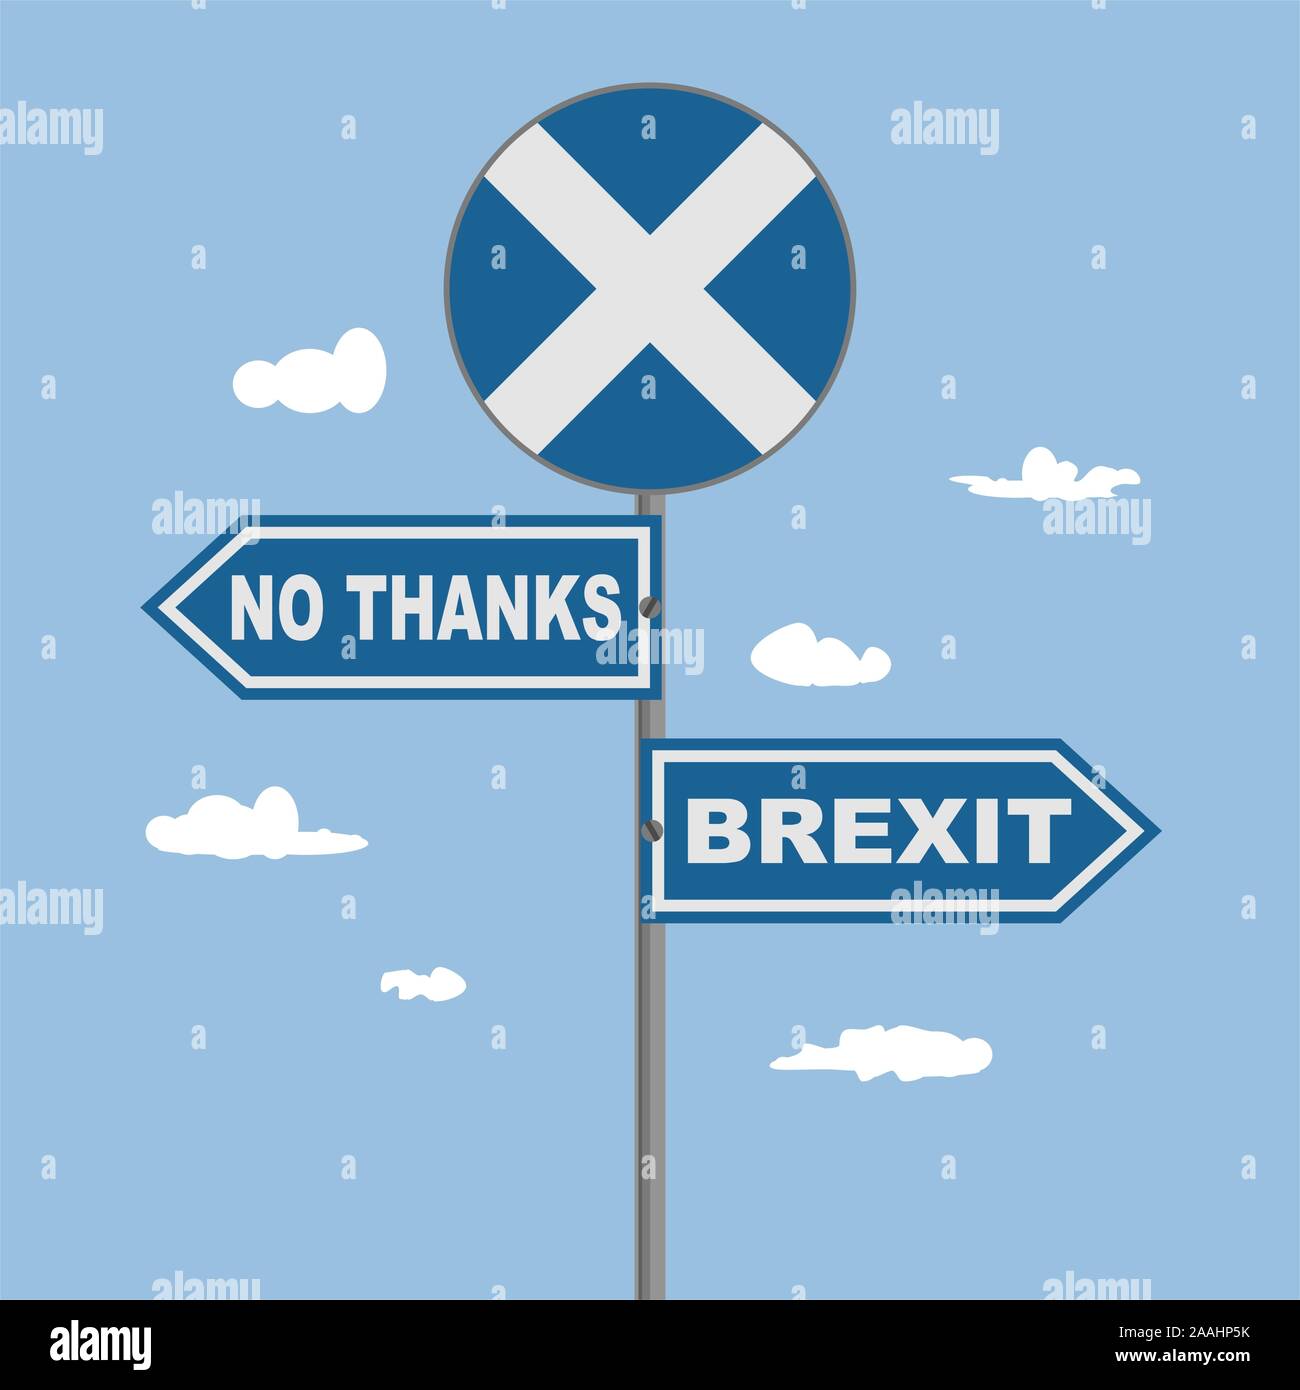 Image relative to politic situation between Great Britain and Scotland. Politic process named as brexit. National flag on road sign. No thanks and Bre Stock Vector